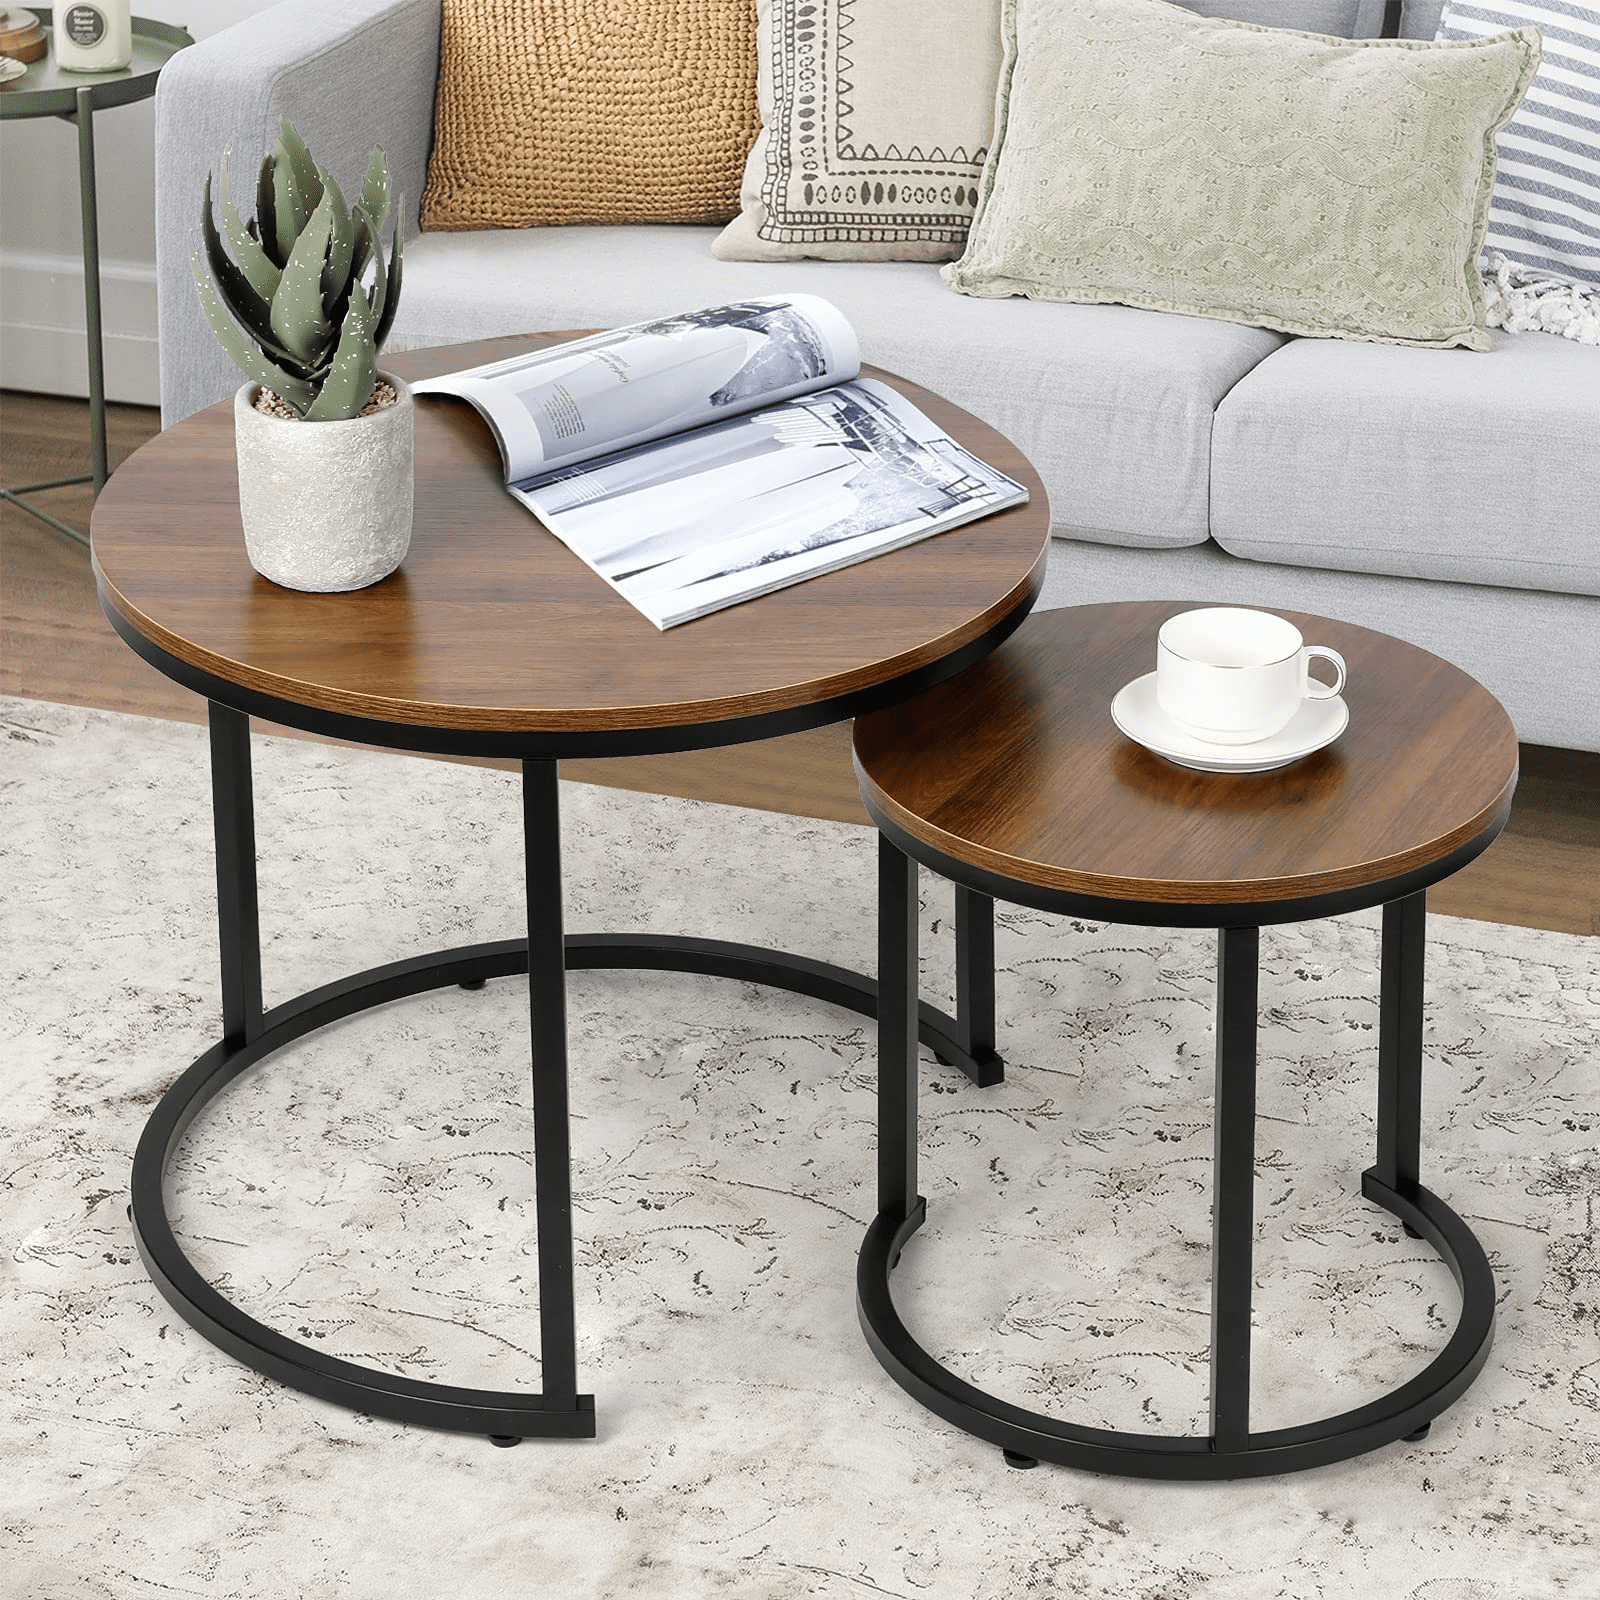 Amzdeal Modern Nesting Coffee Table Set Of 2 Walnut – Walmart Intended For Nesting Coffee Tables (View 7 of 15)